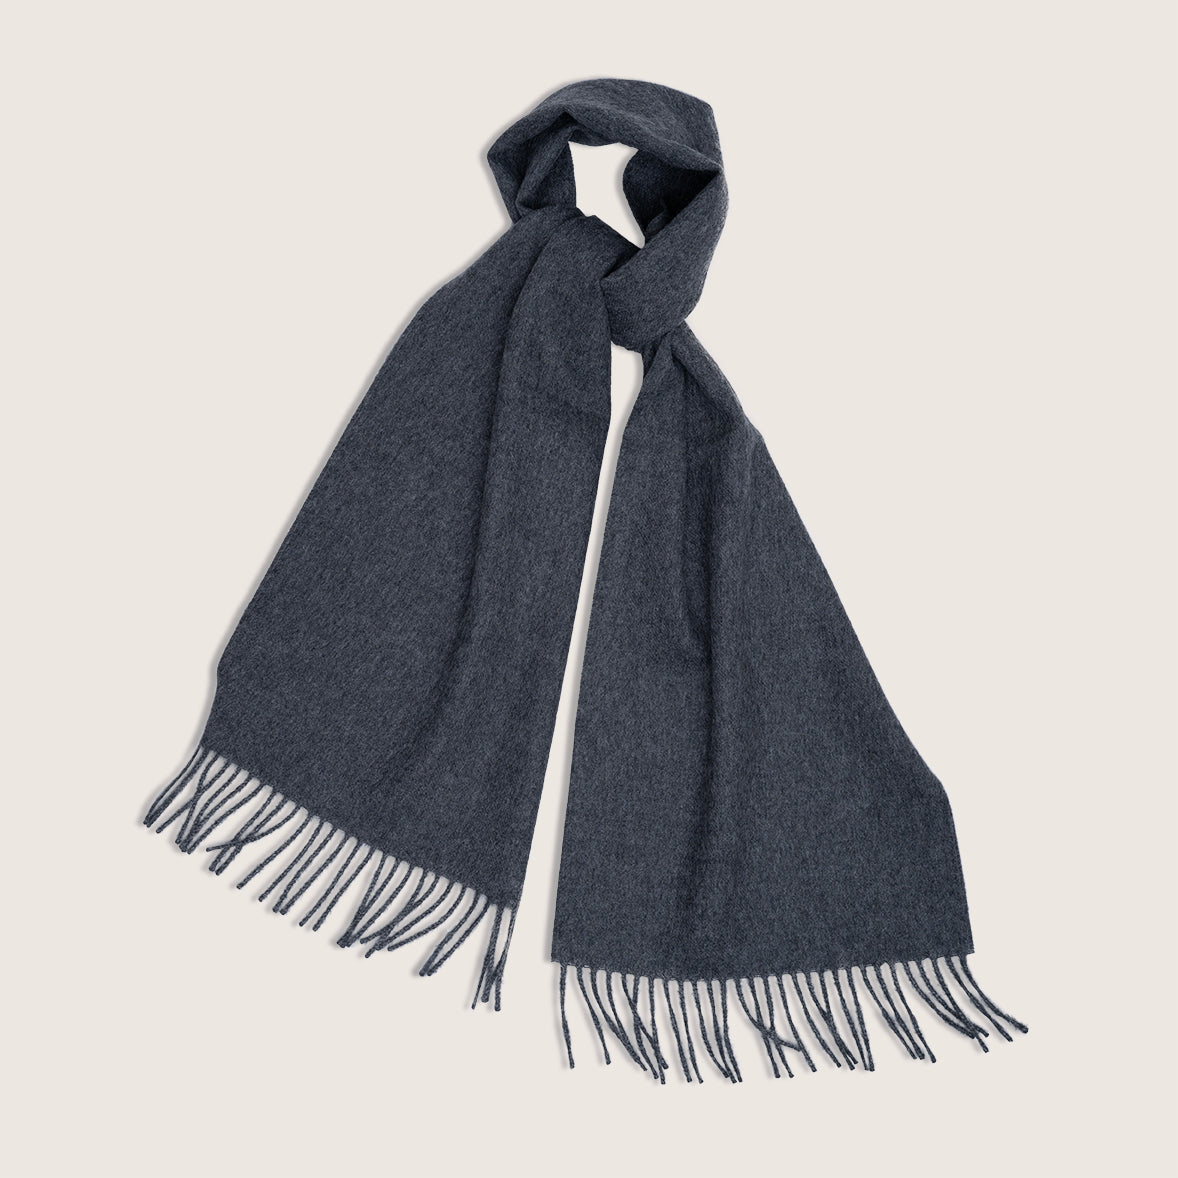 French contemporary artisan brand Timothee Paris dark grey clean baby alpaca scarf knotted